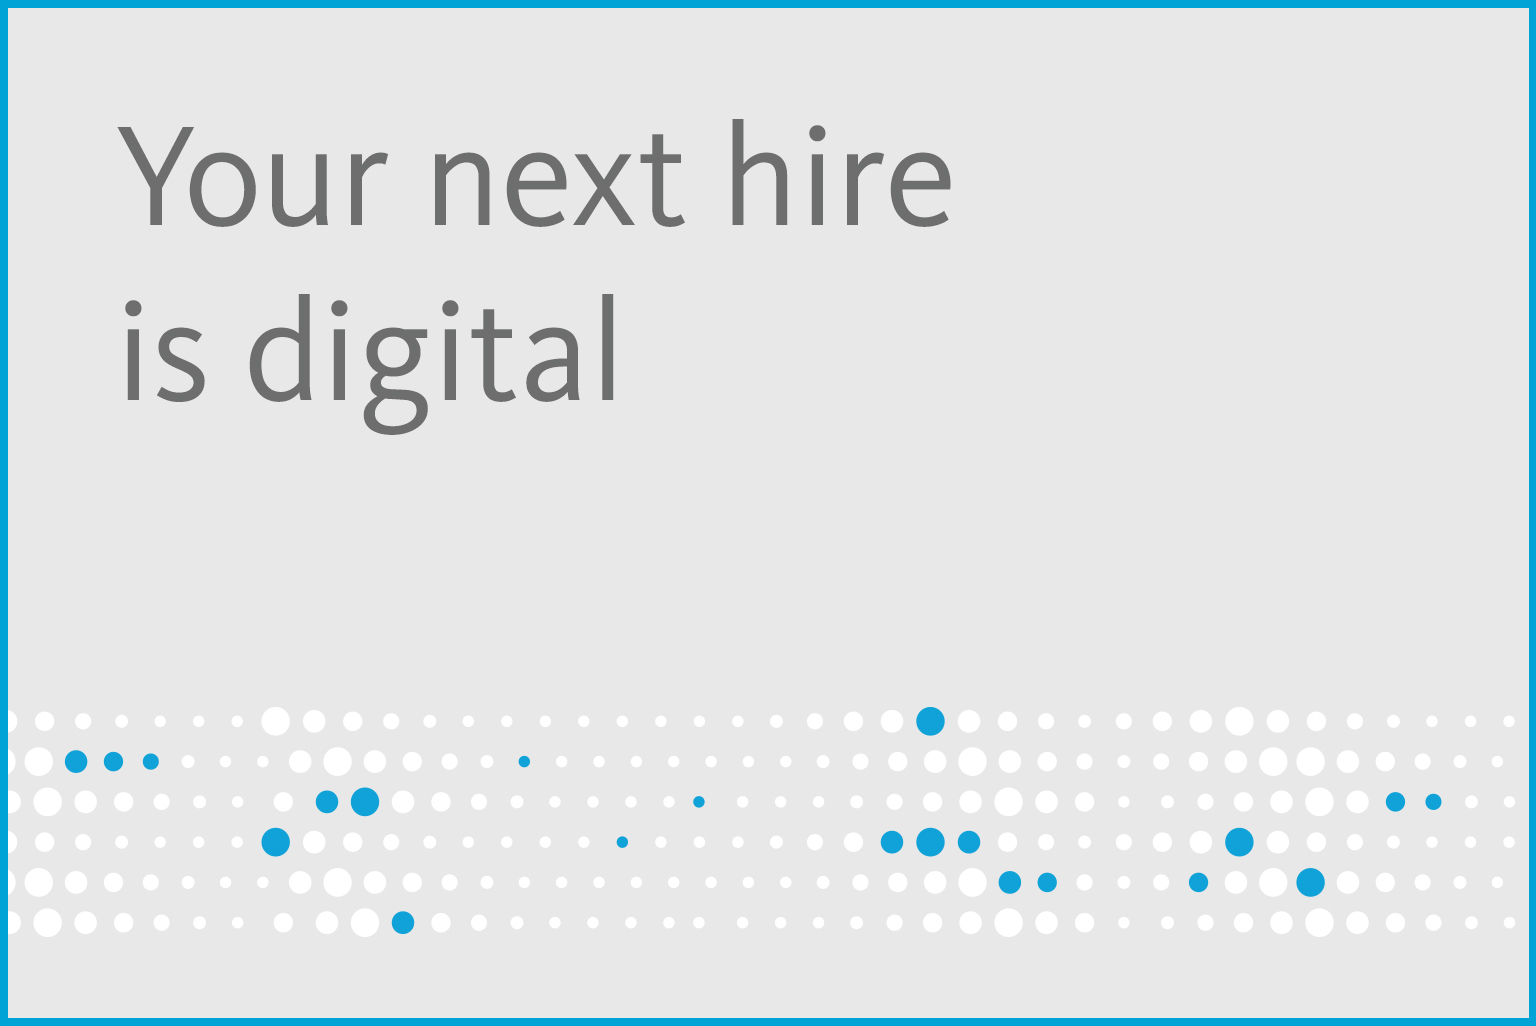 Your next hire is digital